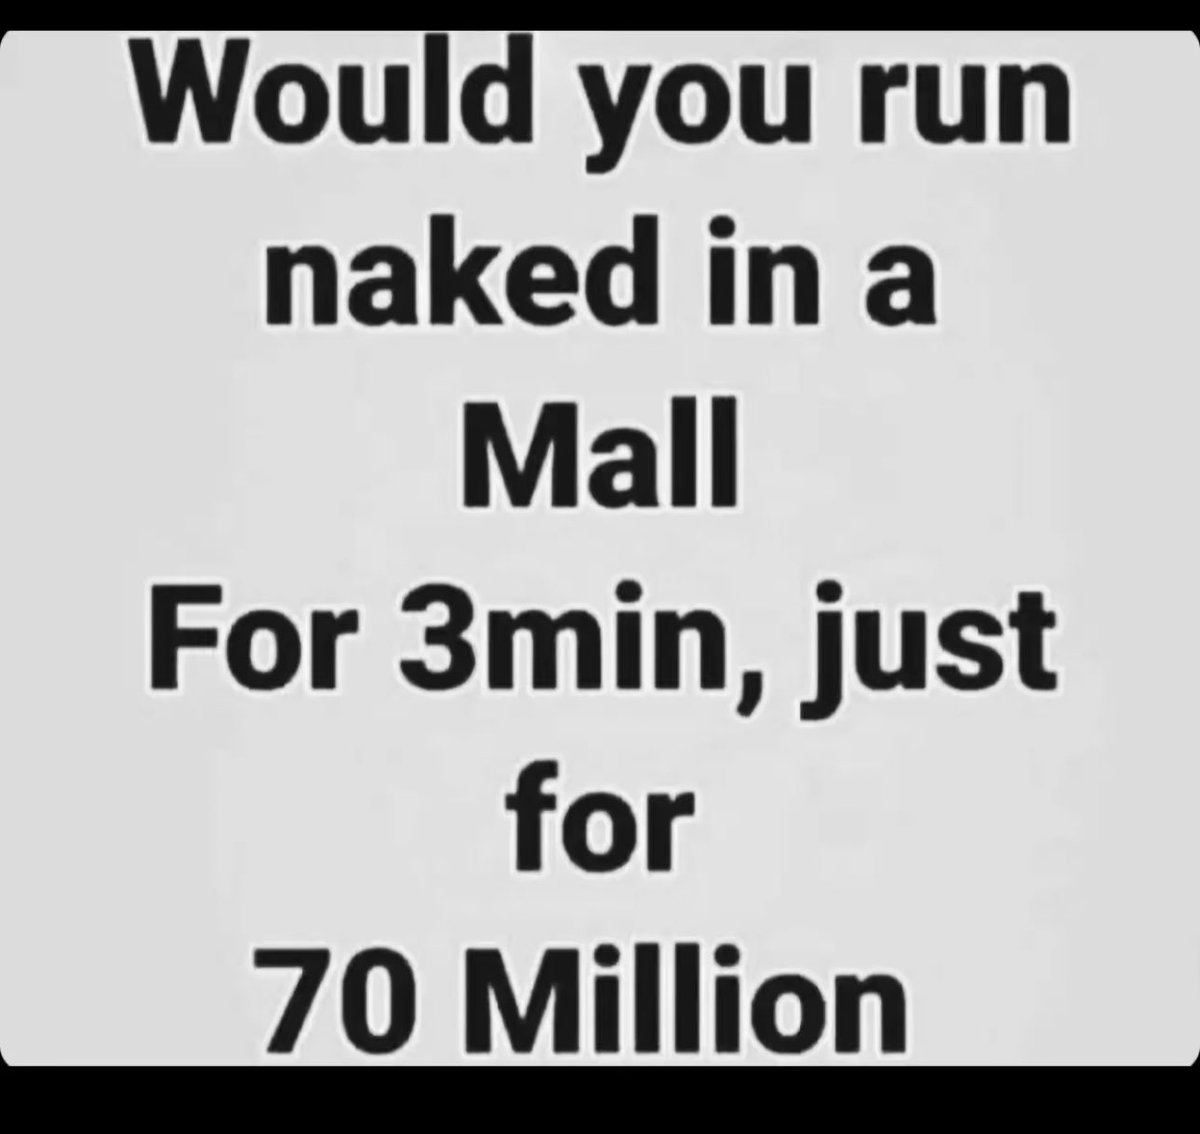 Would you do it for $70,000,000 be sincere 👀?